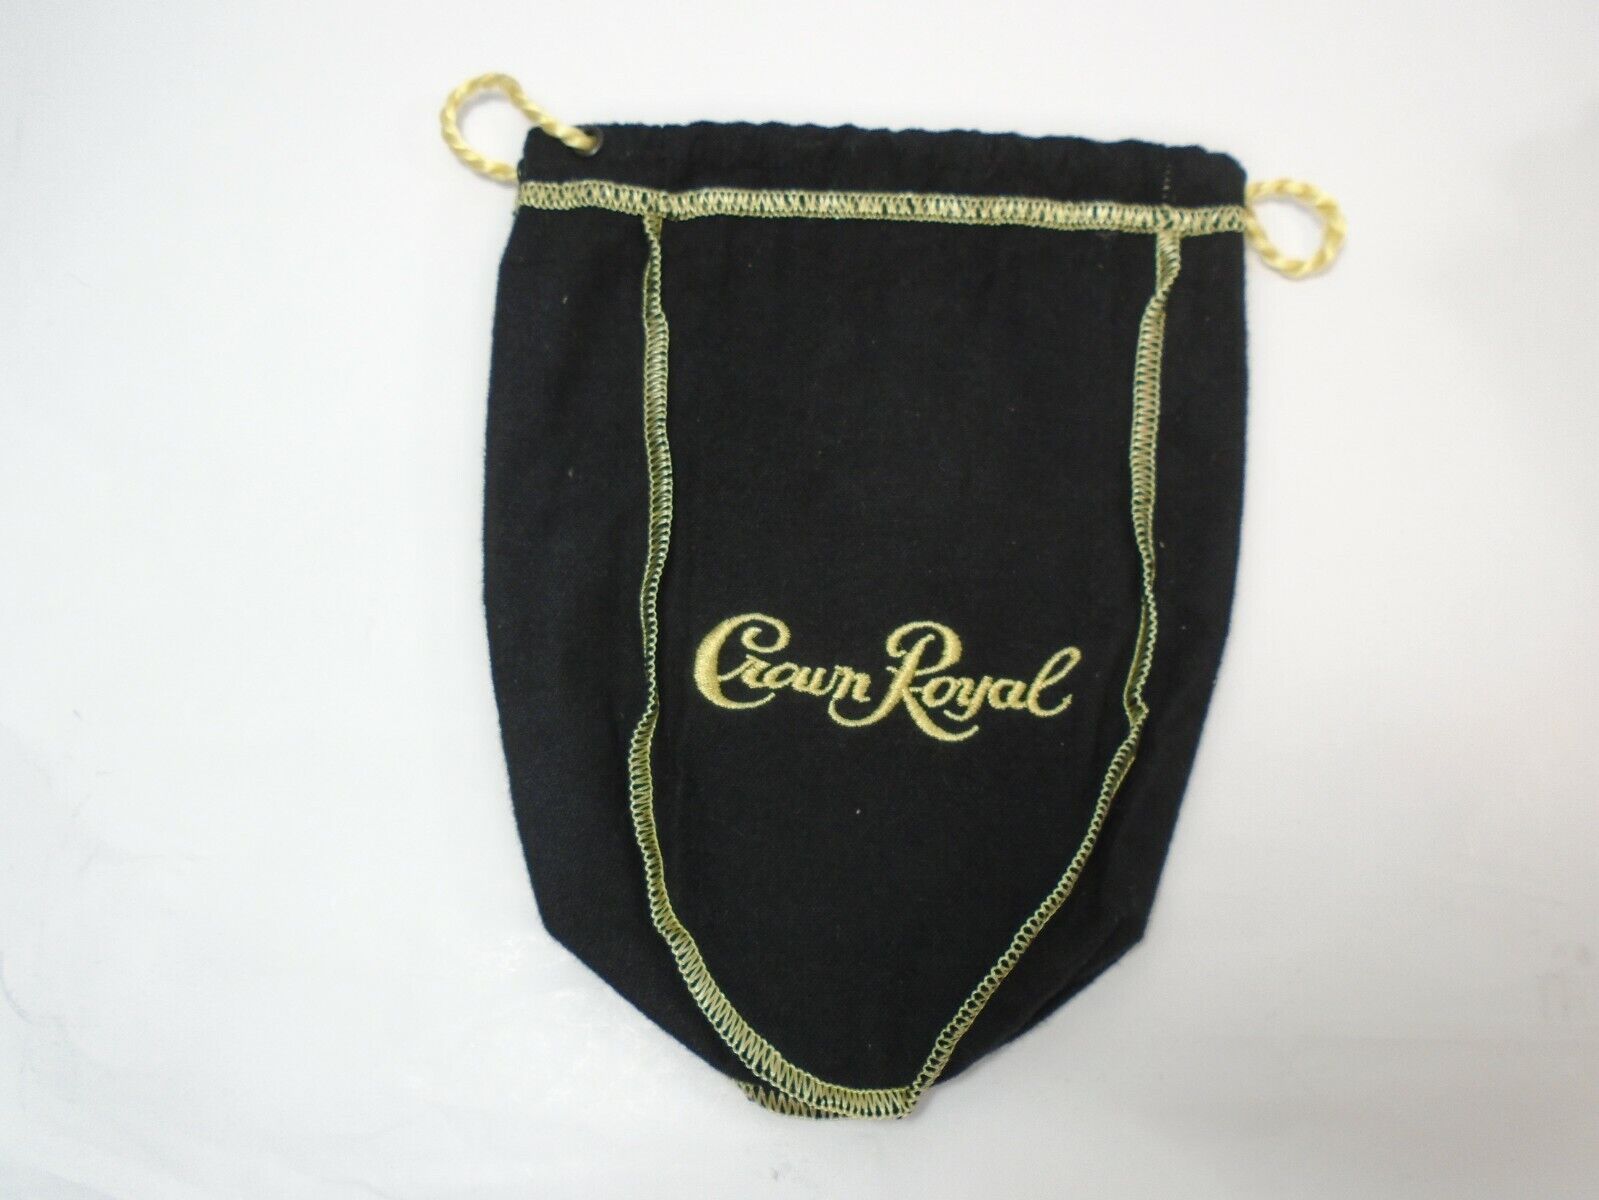 Crown Royal Bags Small Pint Sized 375ml Your Choice of Many Colors Variety 7\